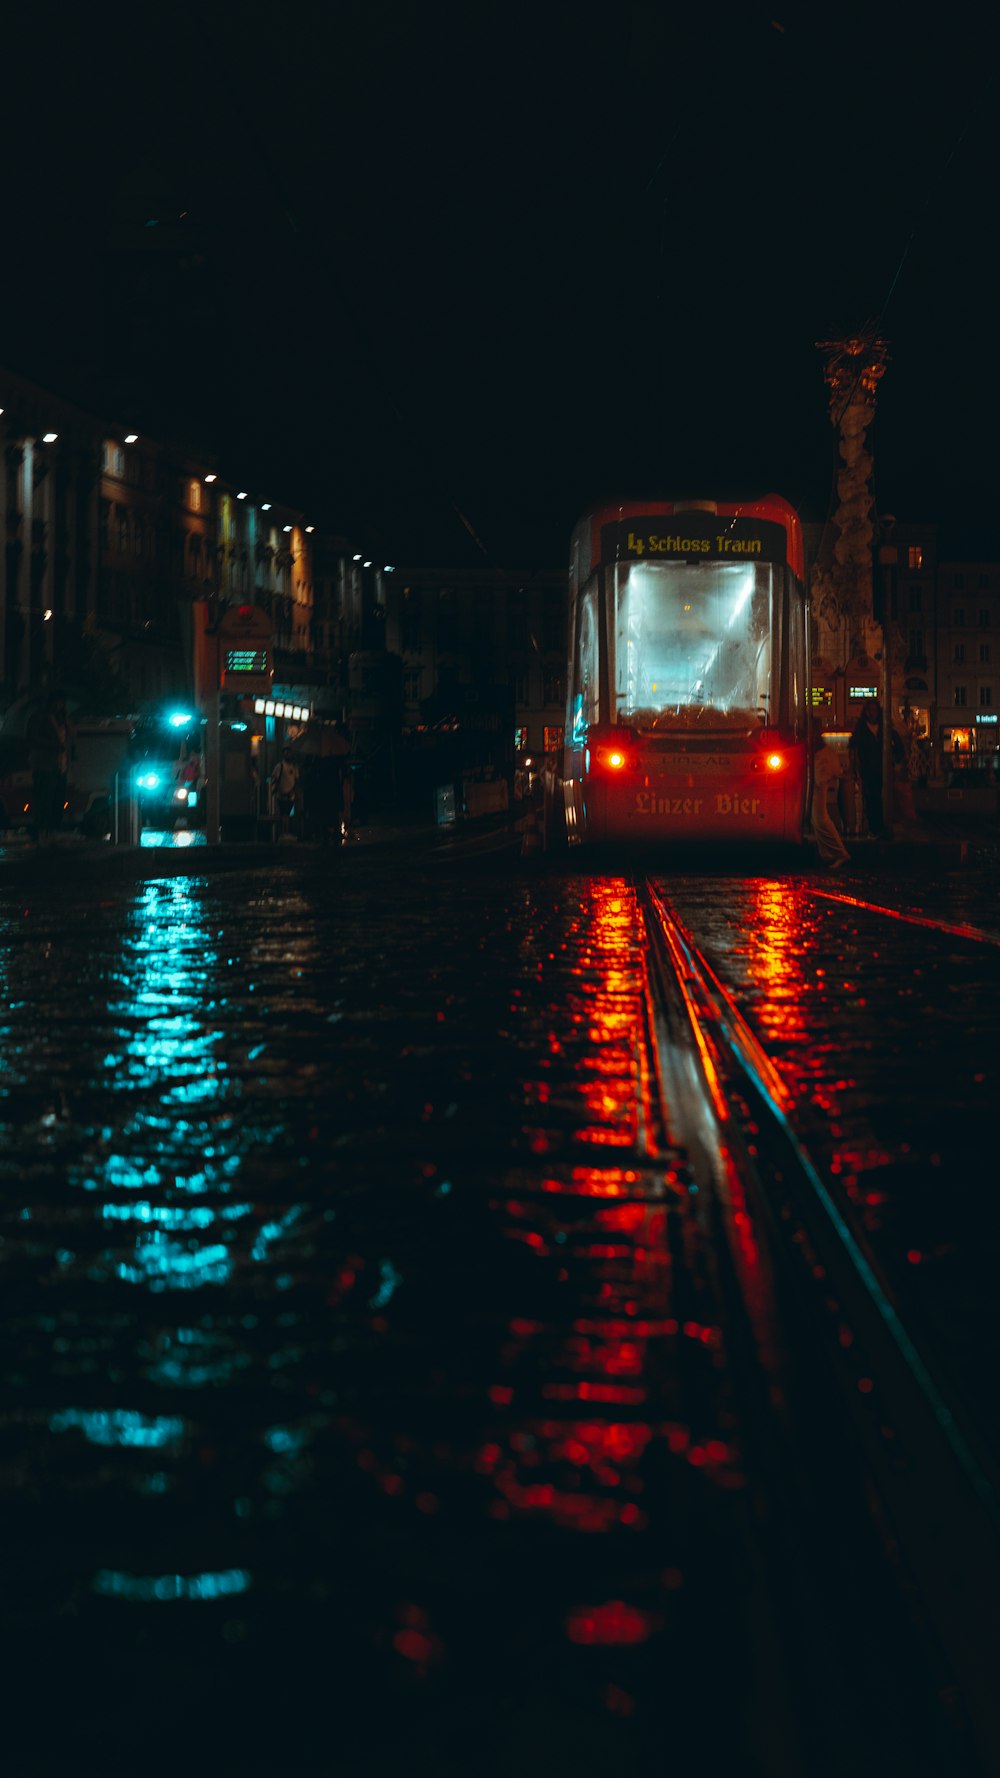 a bus driving down a street at night